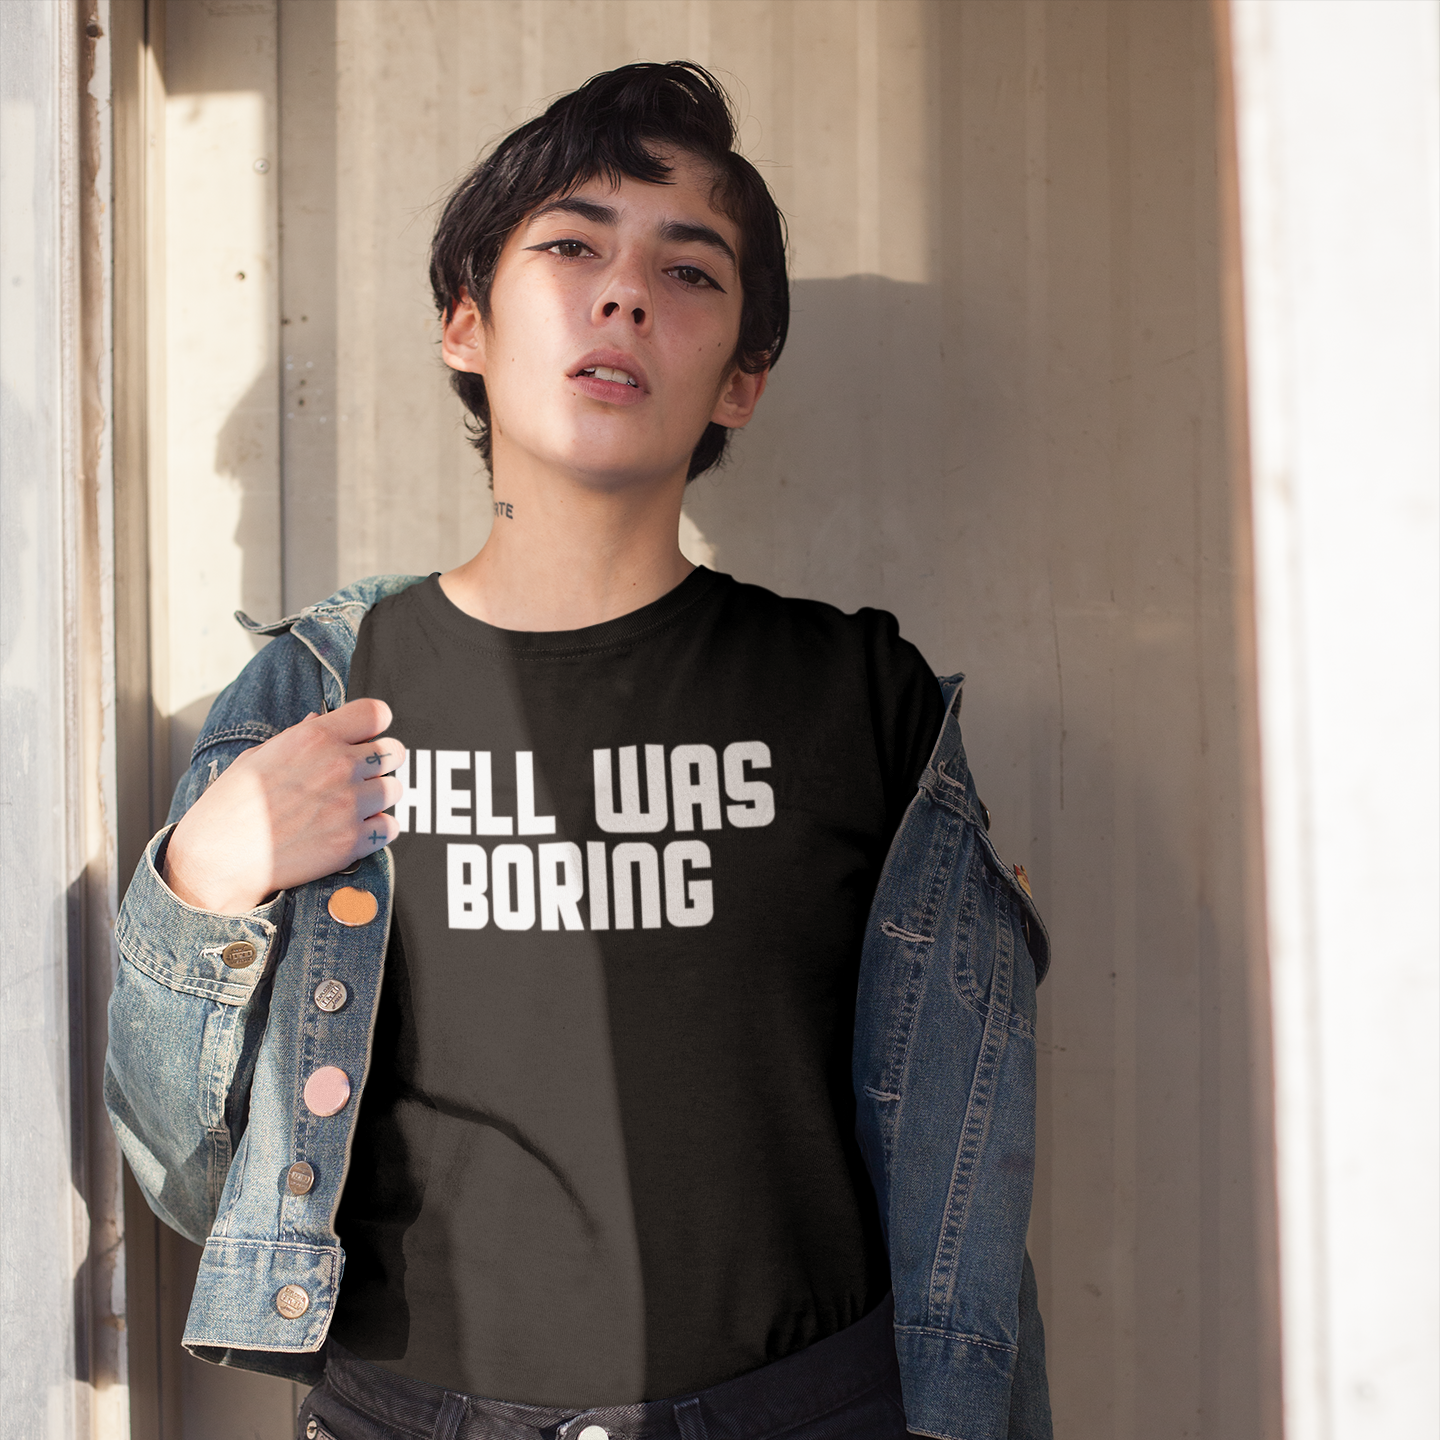 'Hell was boring' adult shirt